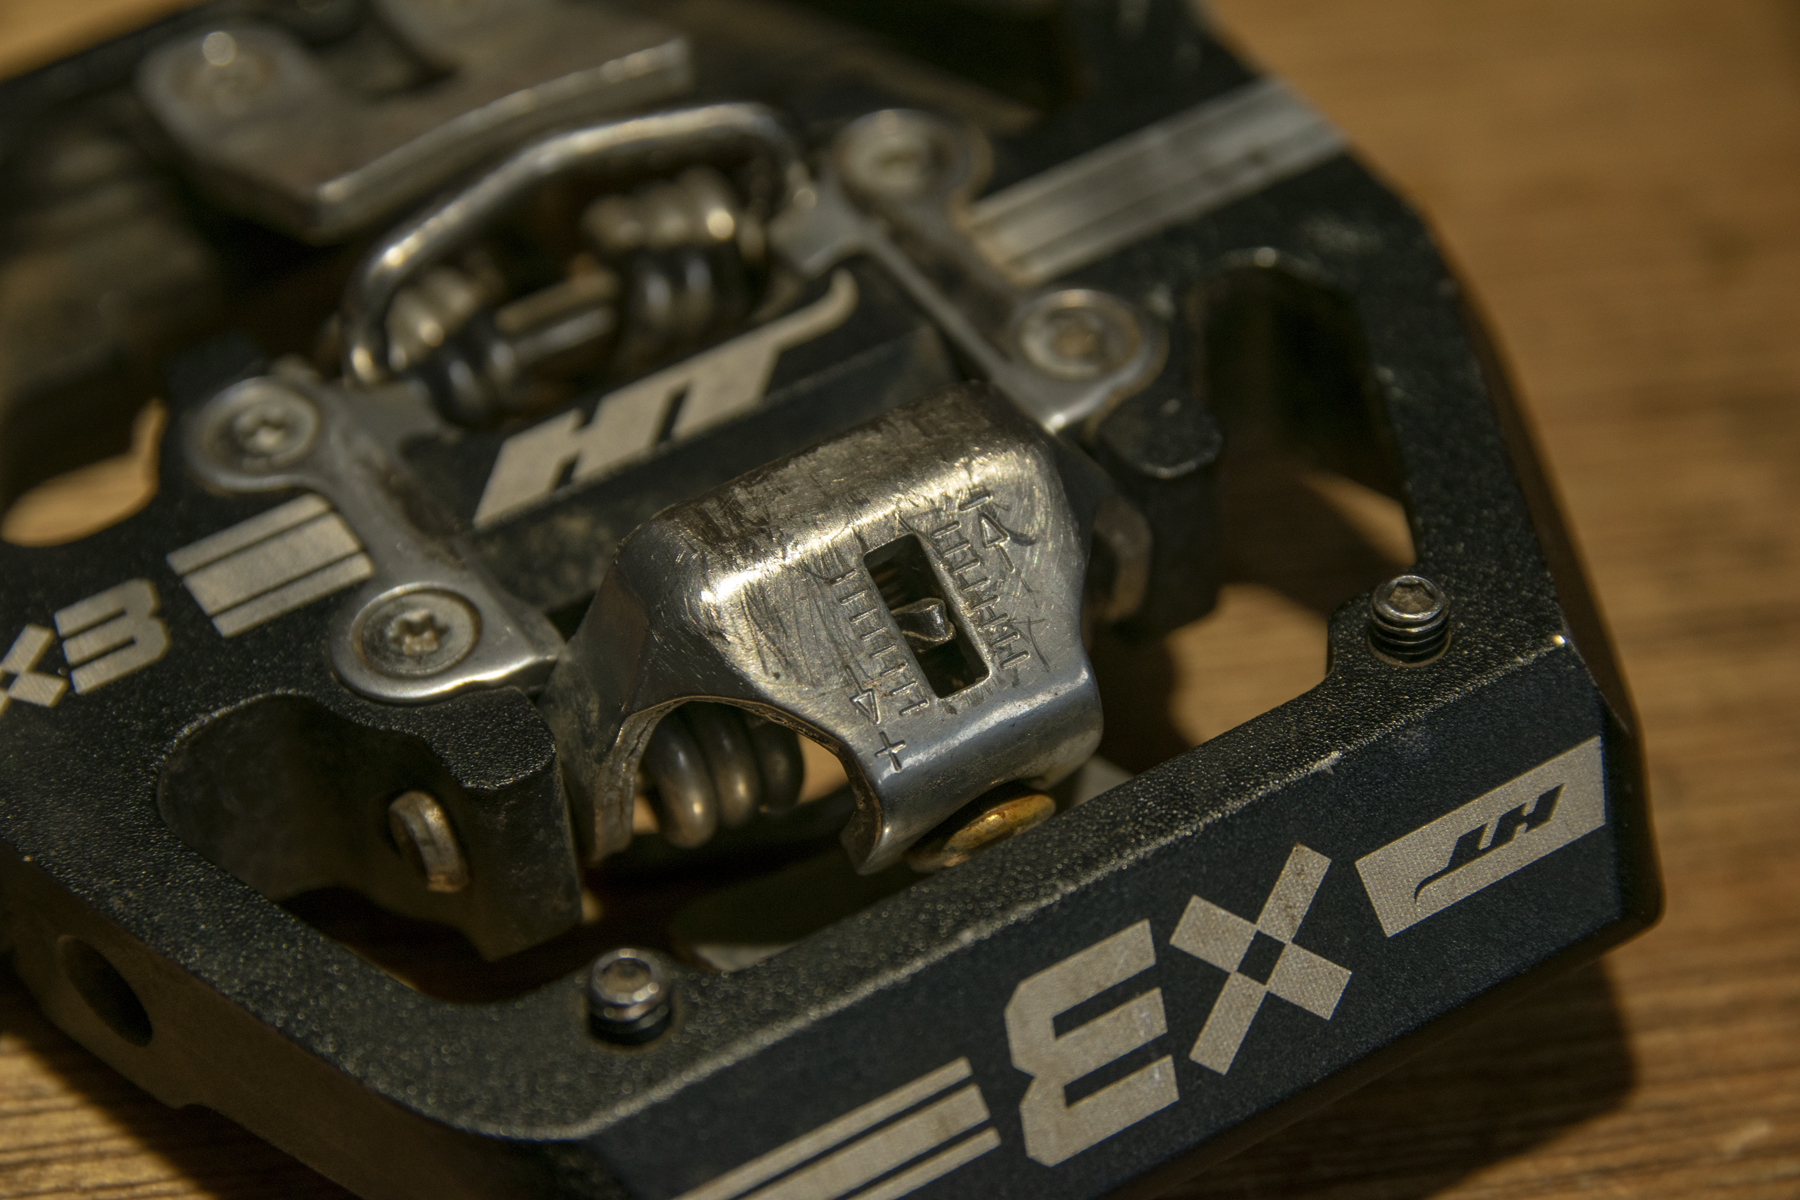 David Golay reviews the HT T2 and X3 Pedals for Blister